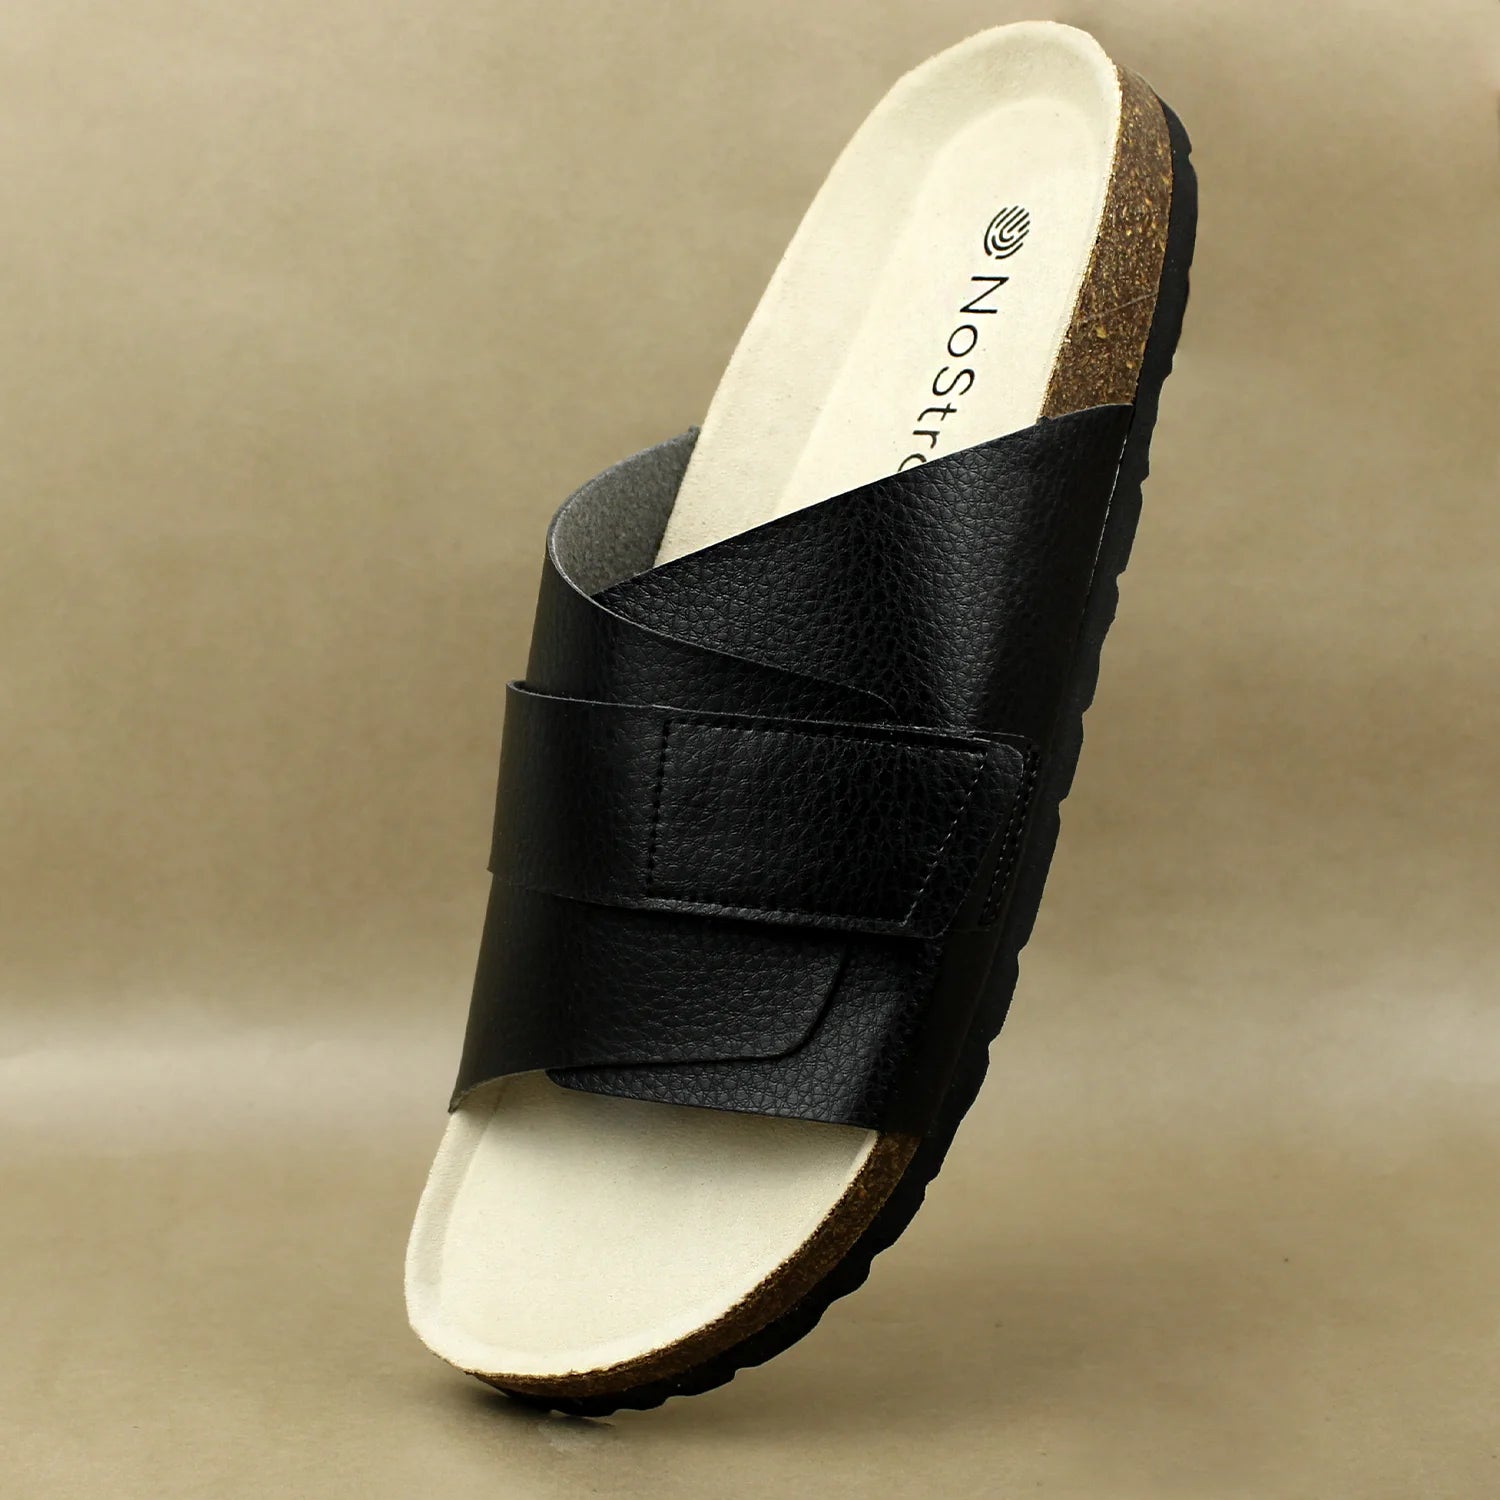 Comfortable black cork sandals for men with soft insole and adjustable straps